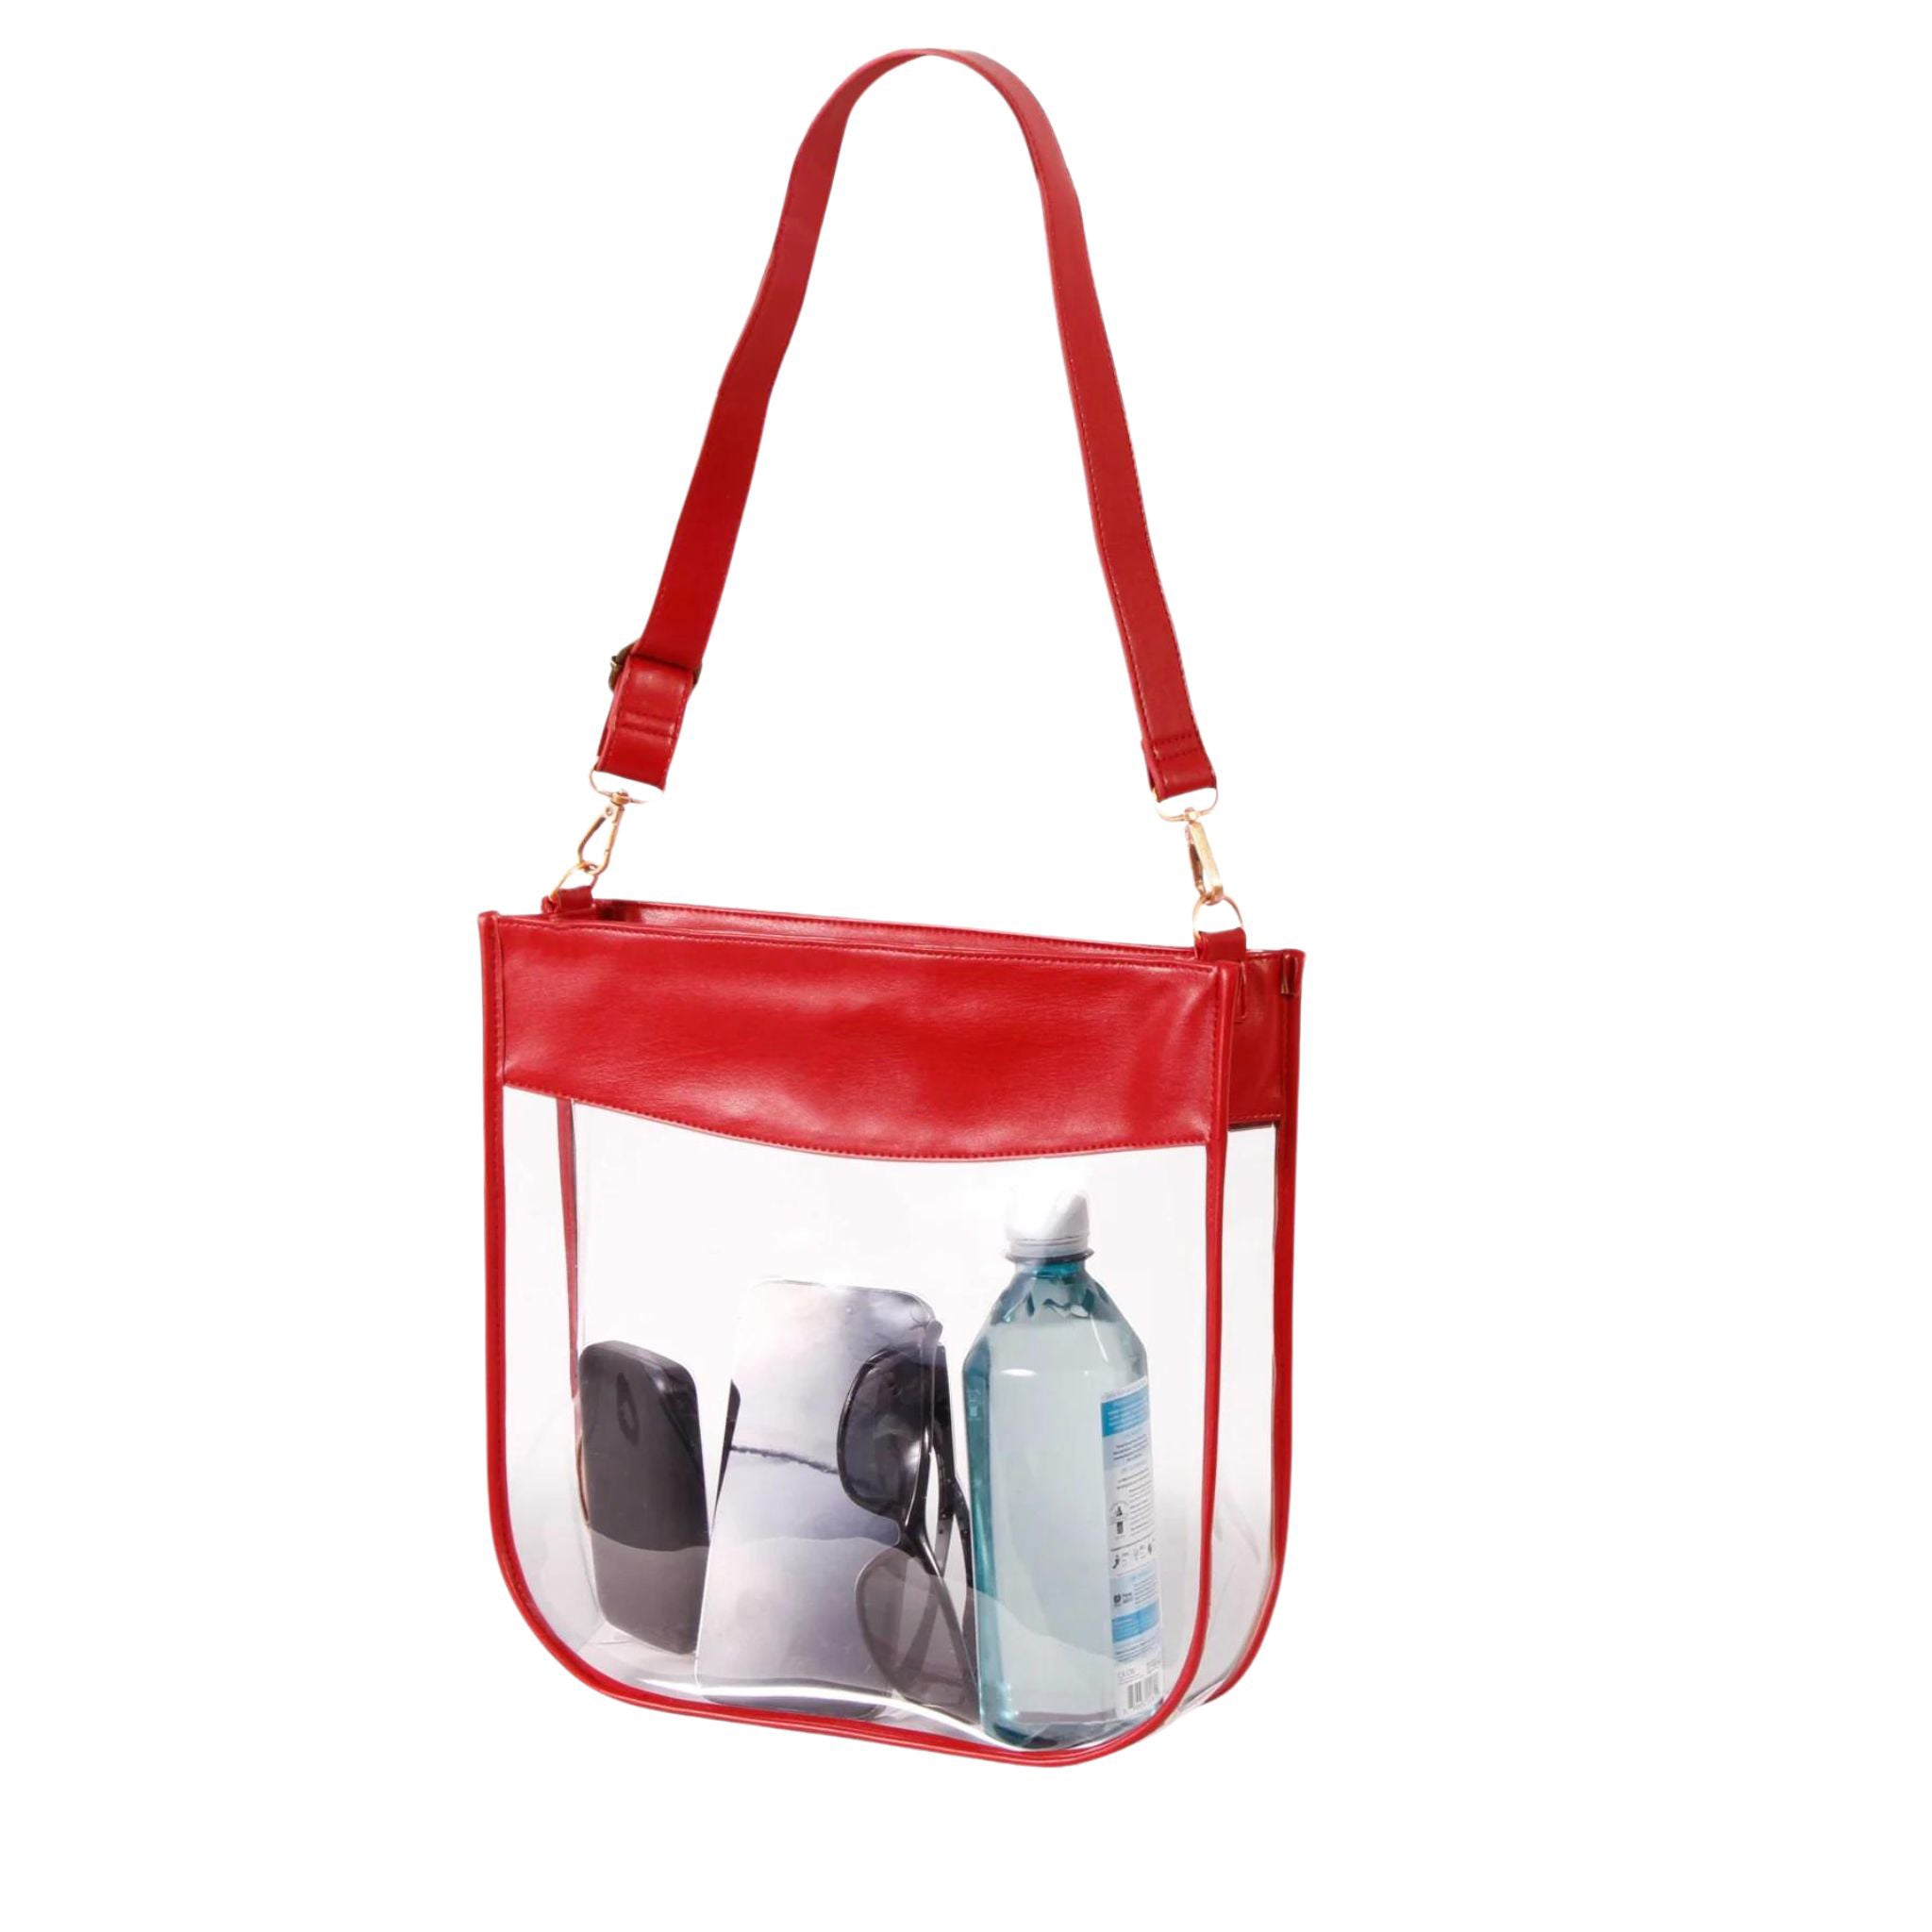 Stadium Approved Clear Messenger - Red Trim